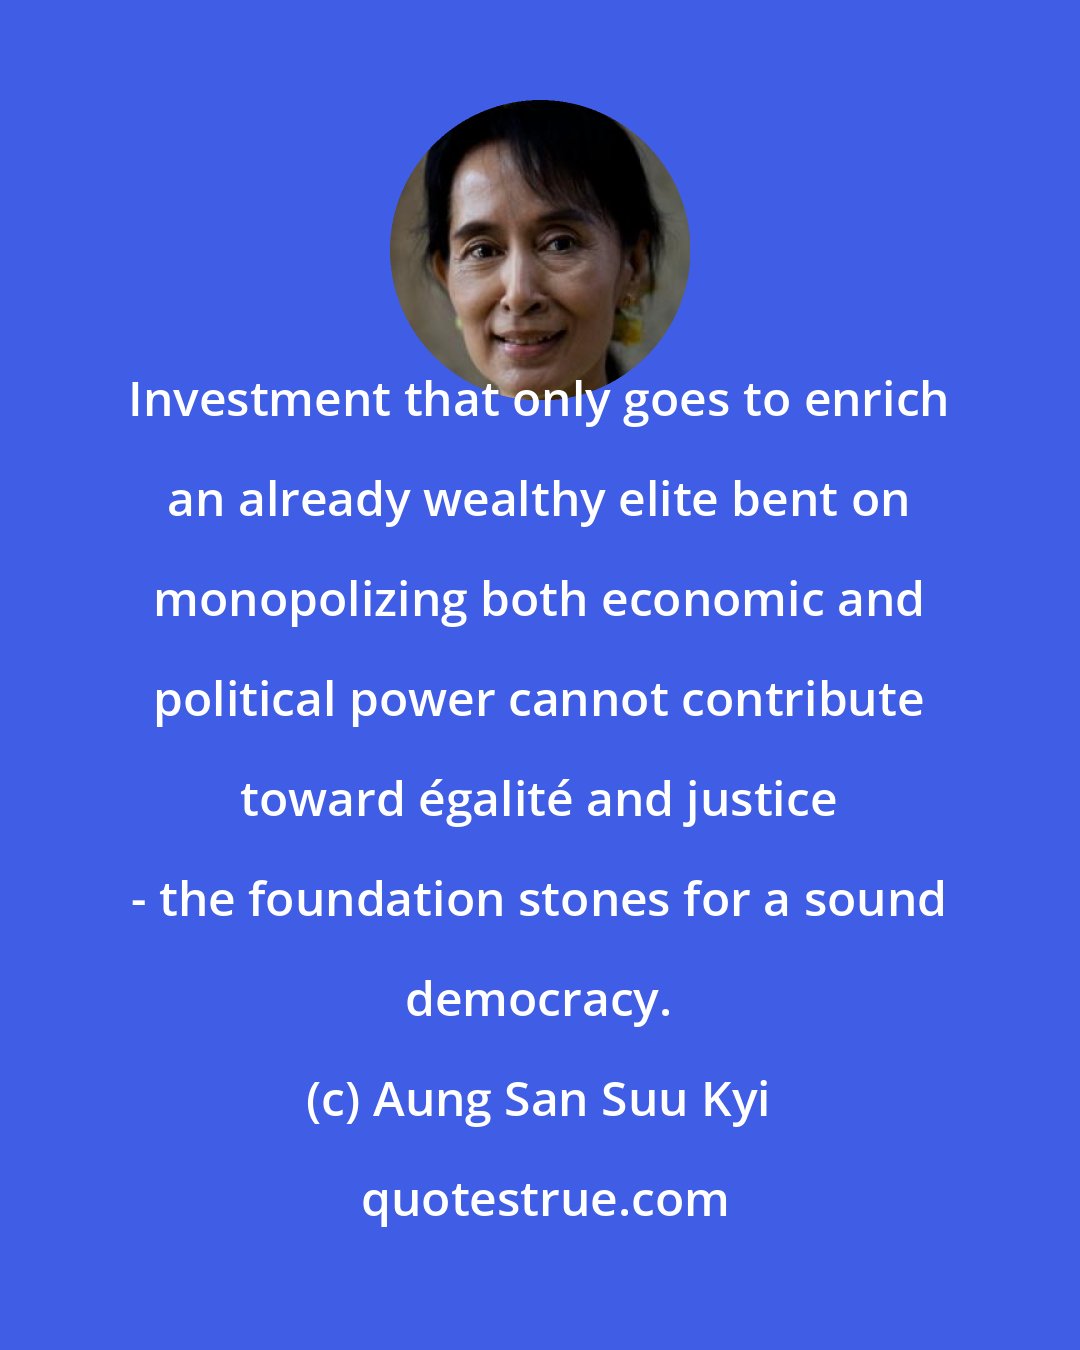 Aung San Suu Kyi: Investment that only goes to enrich an already wealthy elite bent on monopolizing both economic and political power cannot contribute toward égalité and justice - the foundation stones for a sound democracy.